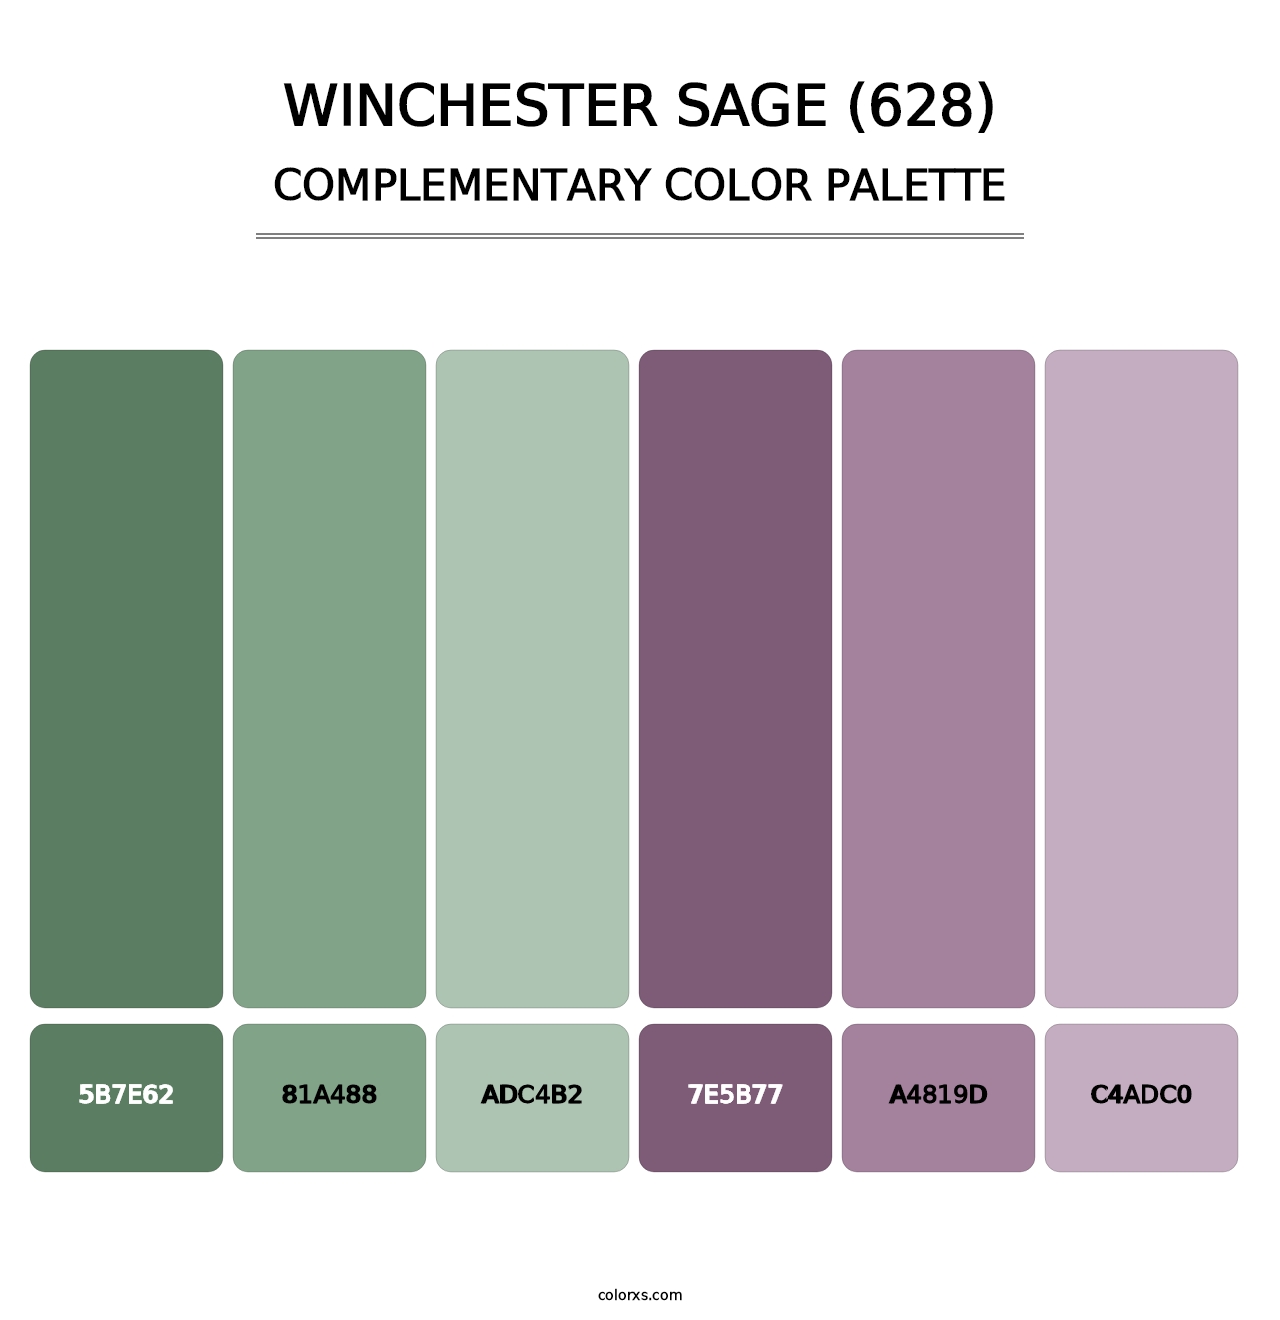 Winchester Sage (628) - Complementary Color Palette